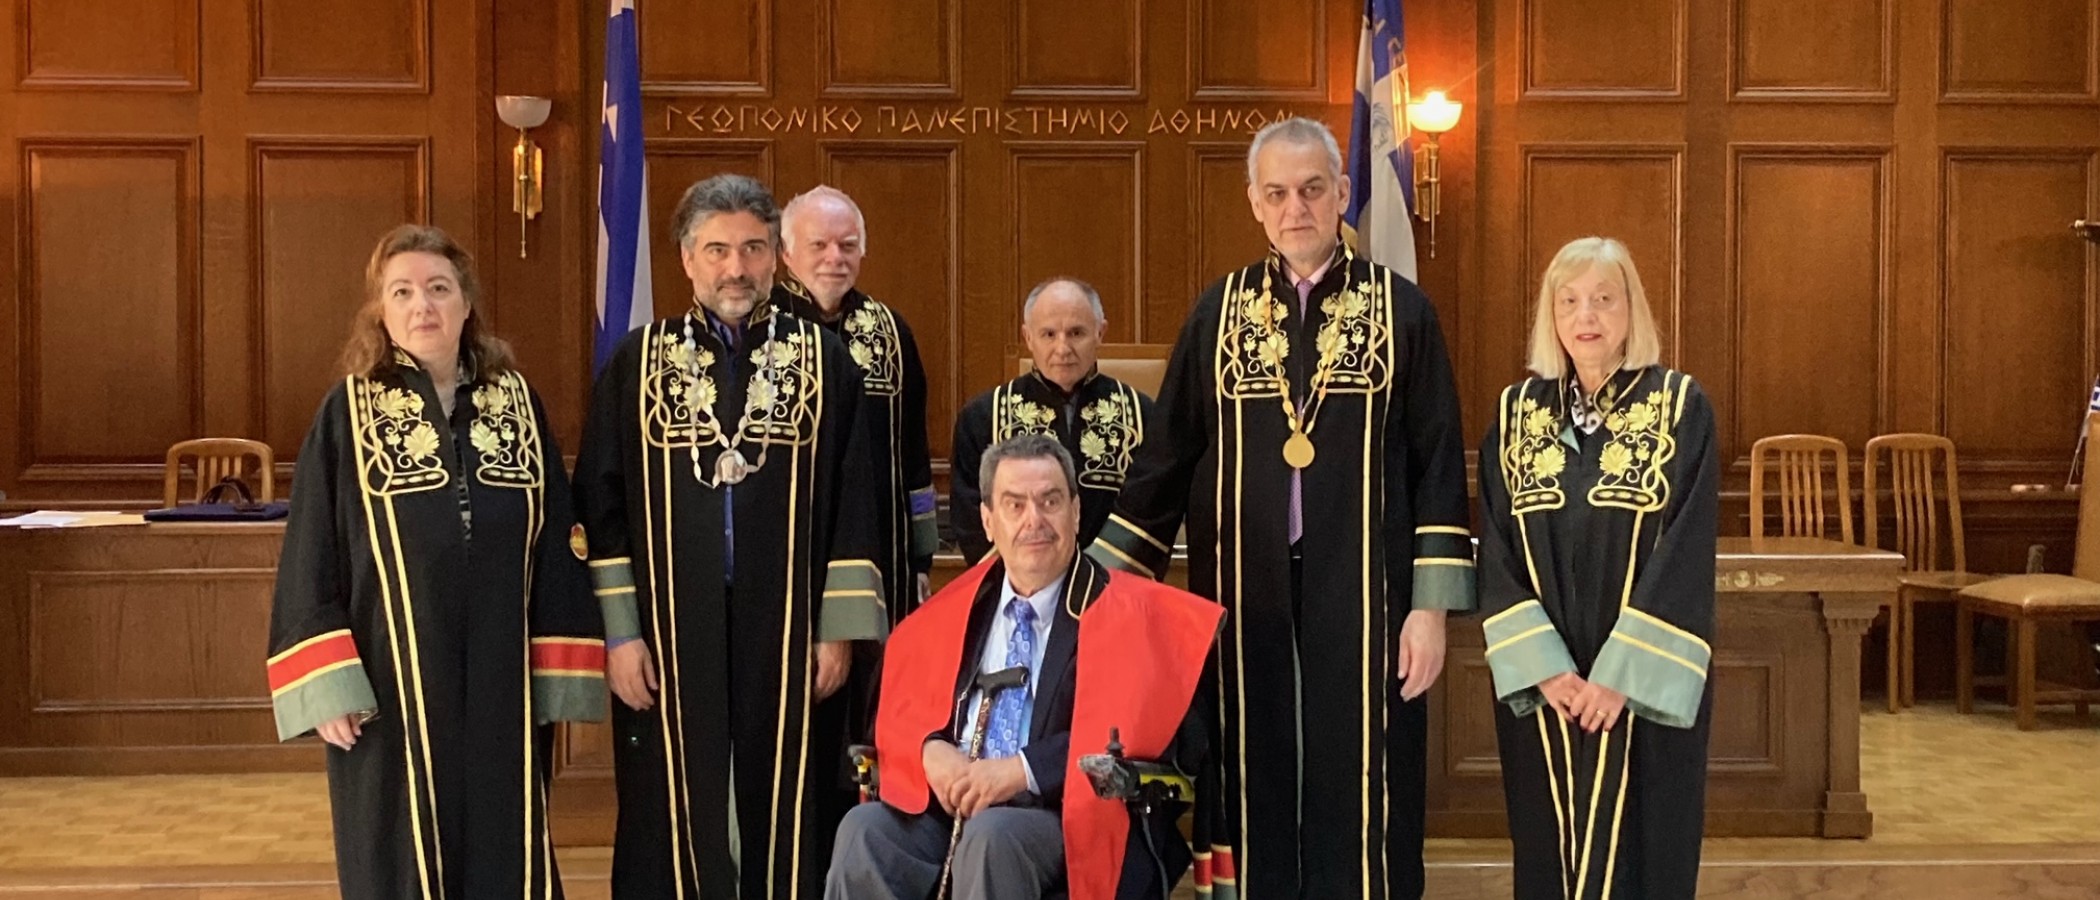 Ceremony Granting of an Honorary Doctorate of the Agricultural University of Athens to the Professor Emeritus of the Colorado State University, Dr. Ioannis Sofos.